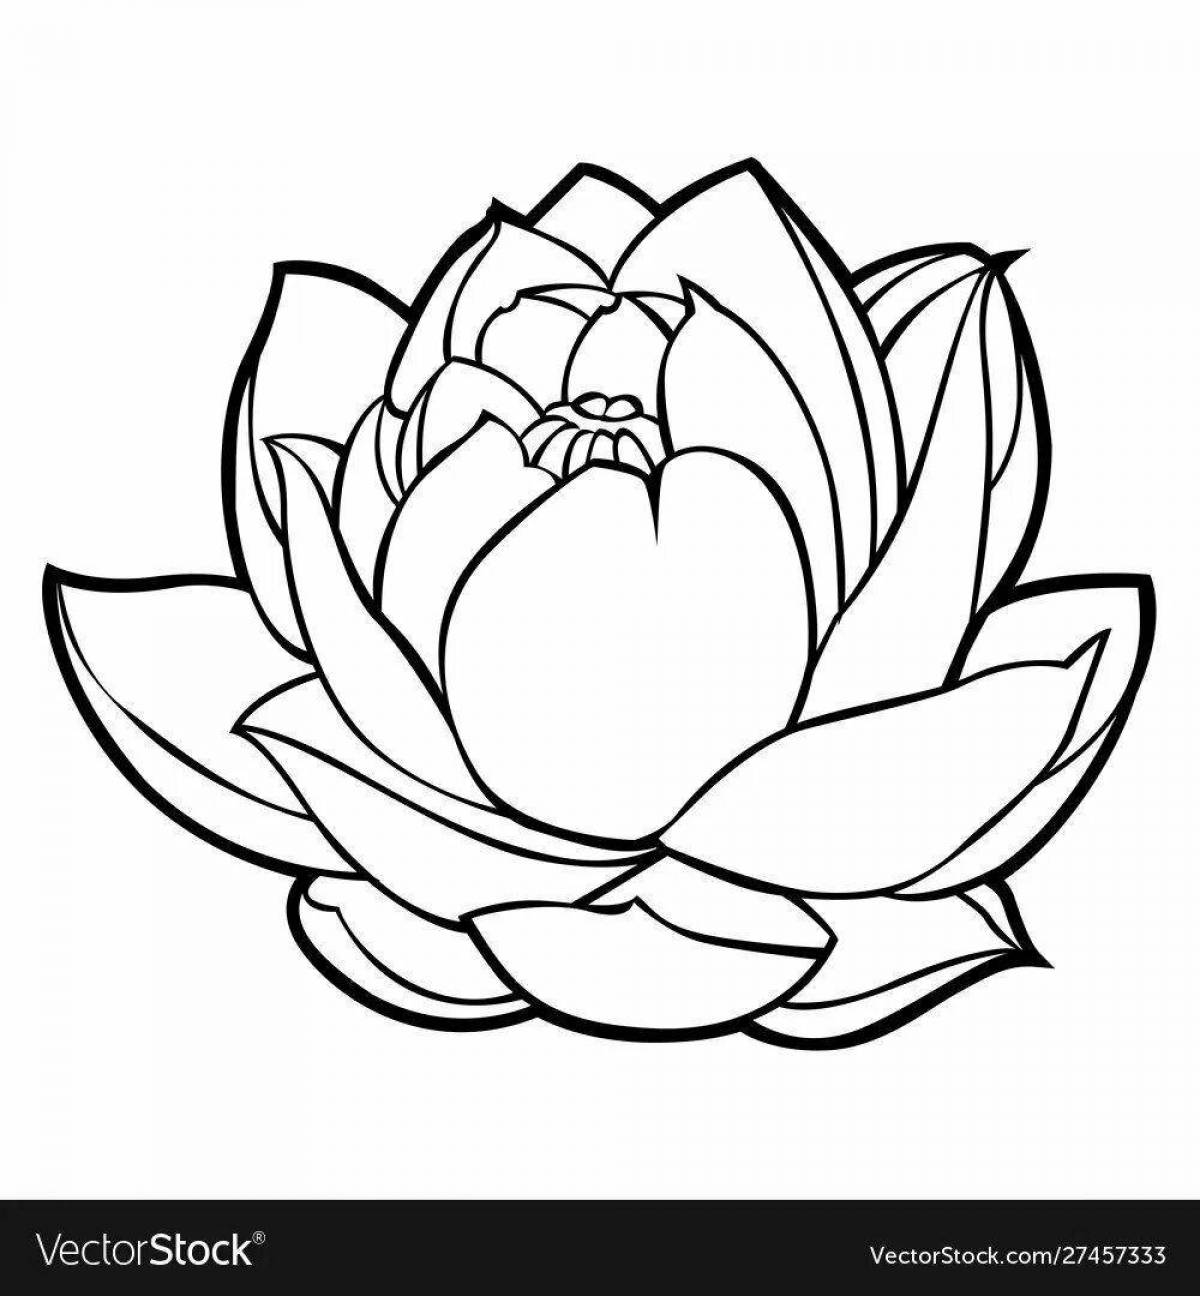 Colorful stone flower coloring book for kids